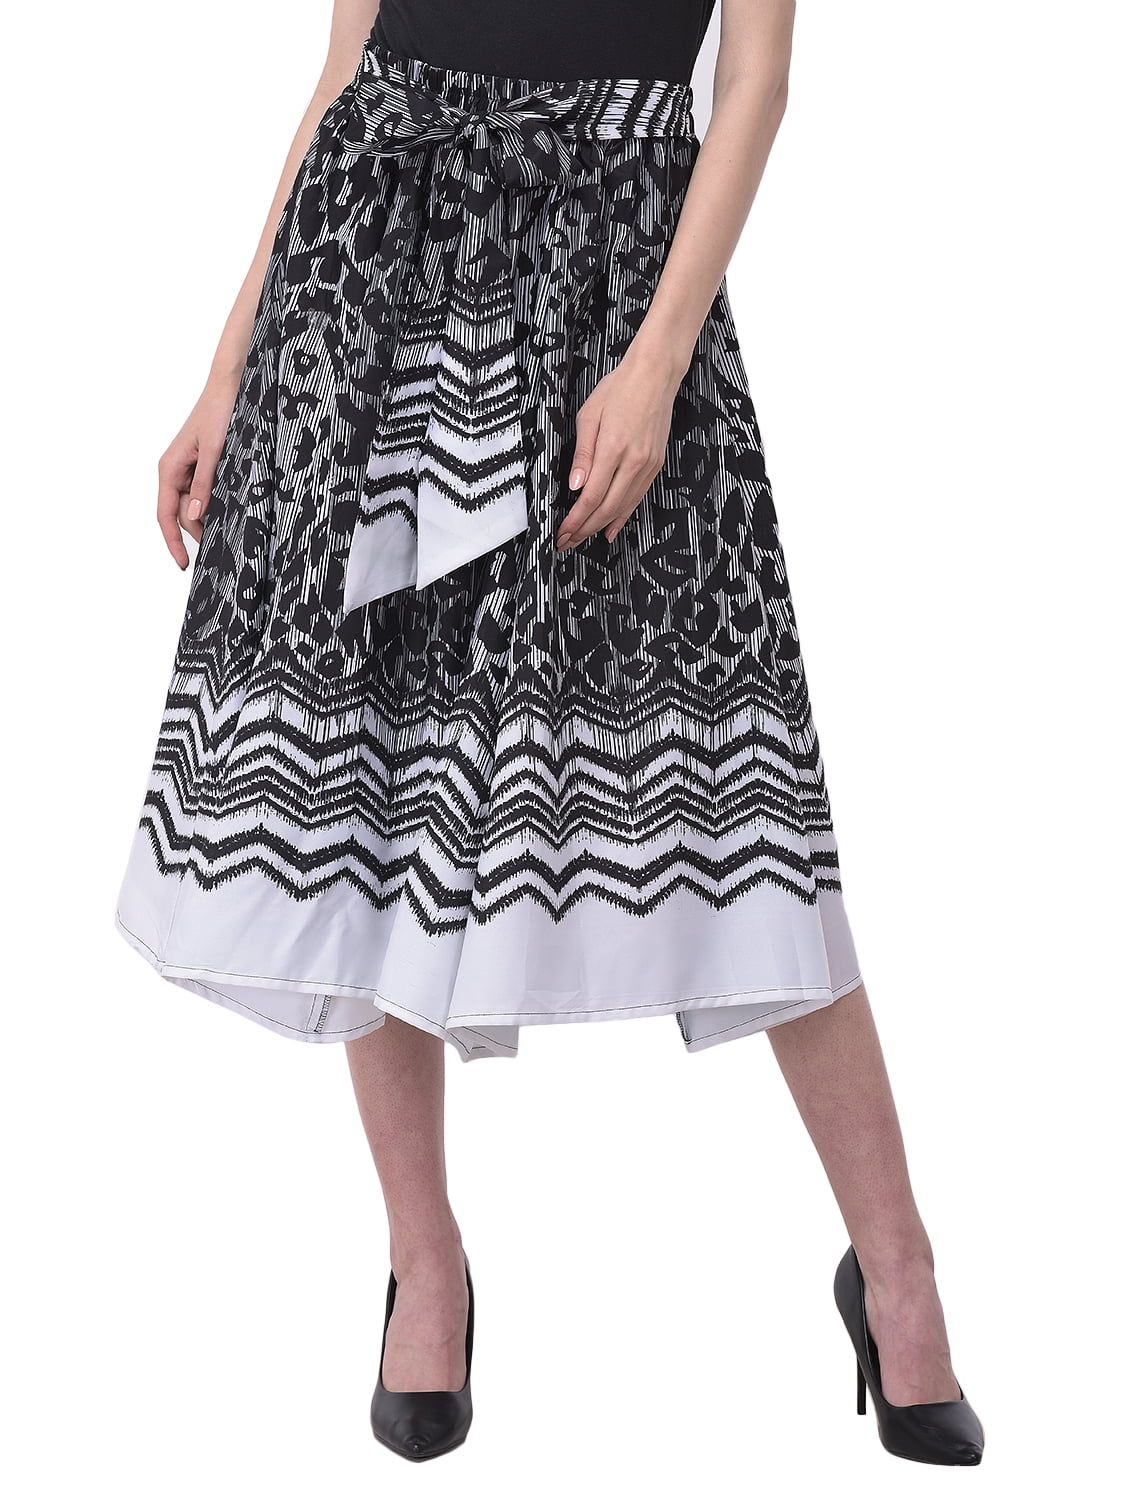 Aggregate 185+ buy ladies skirts online latest